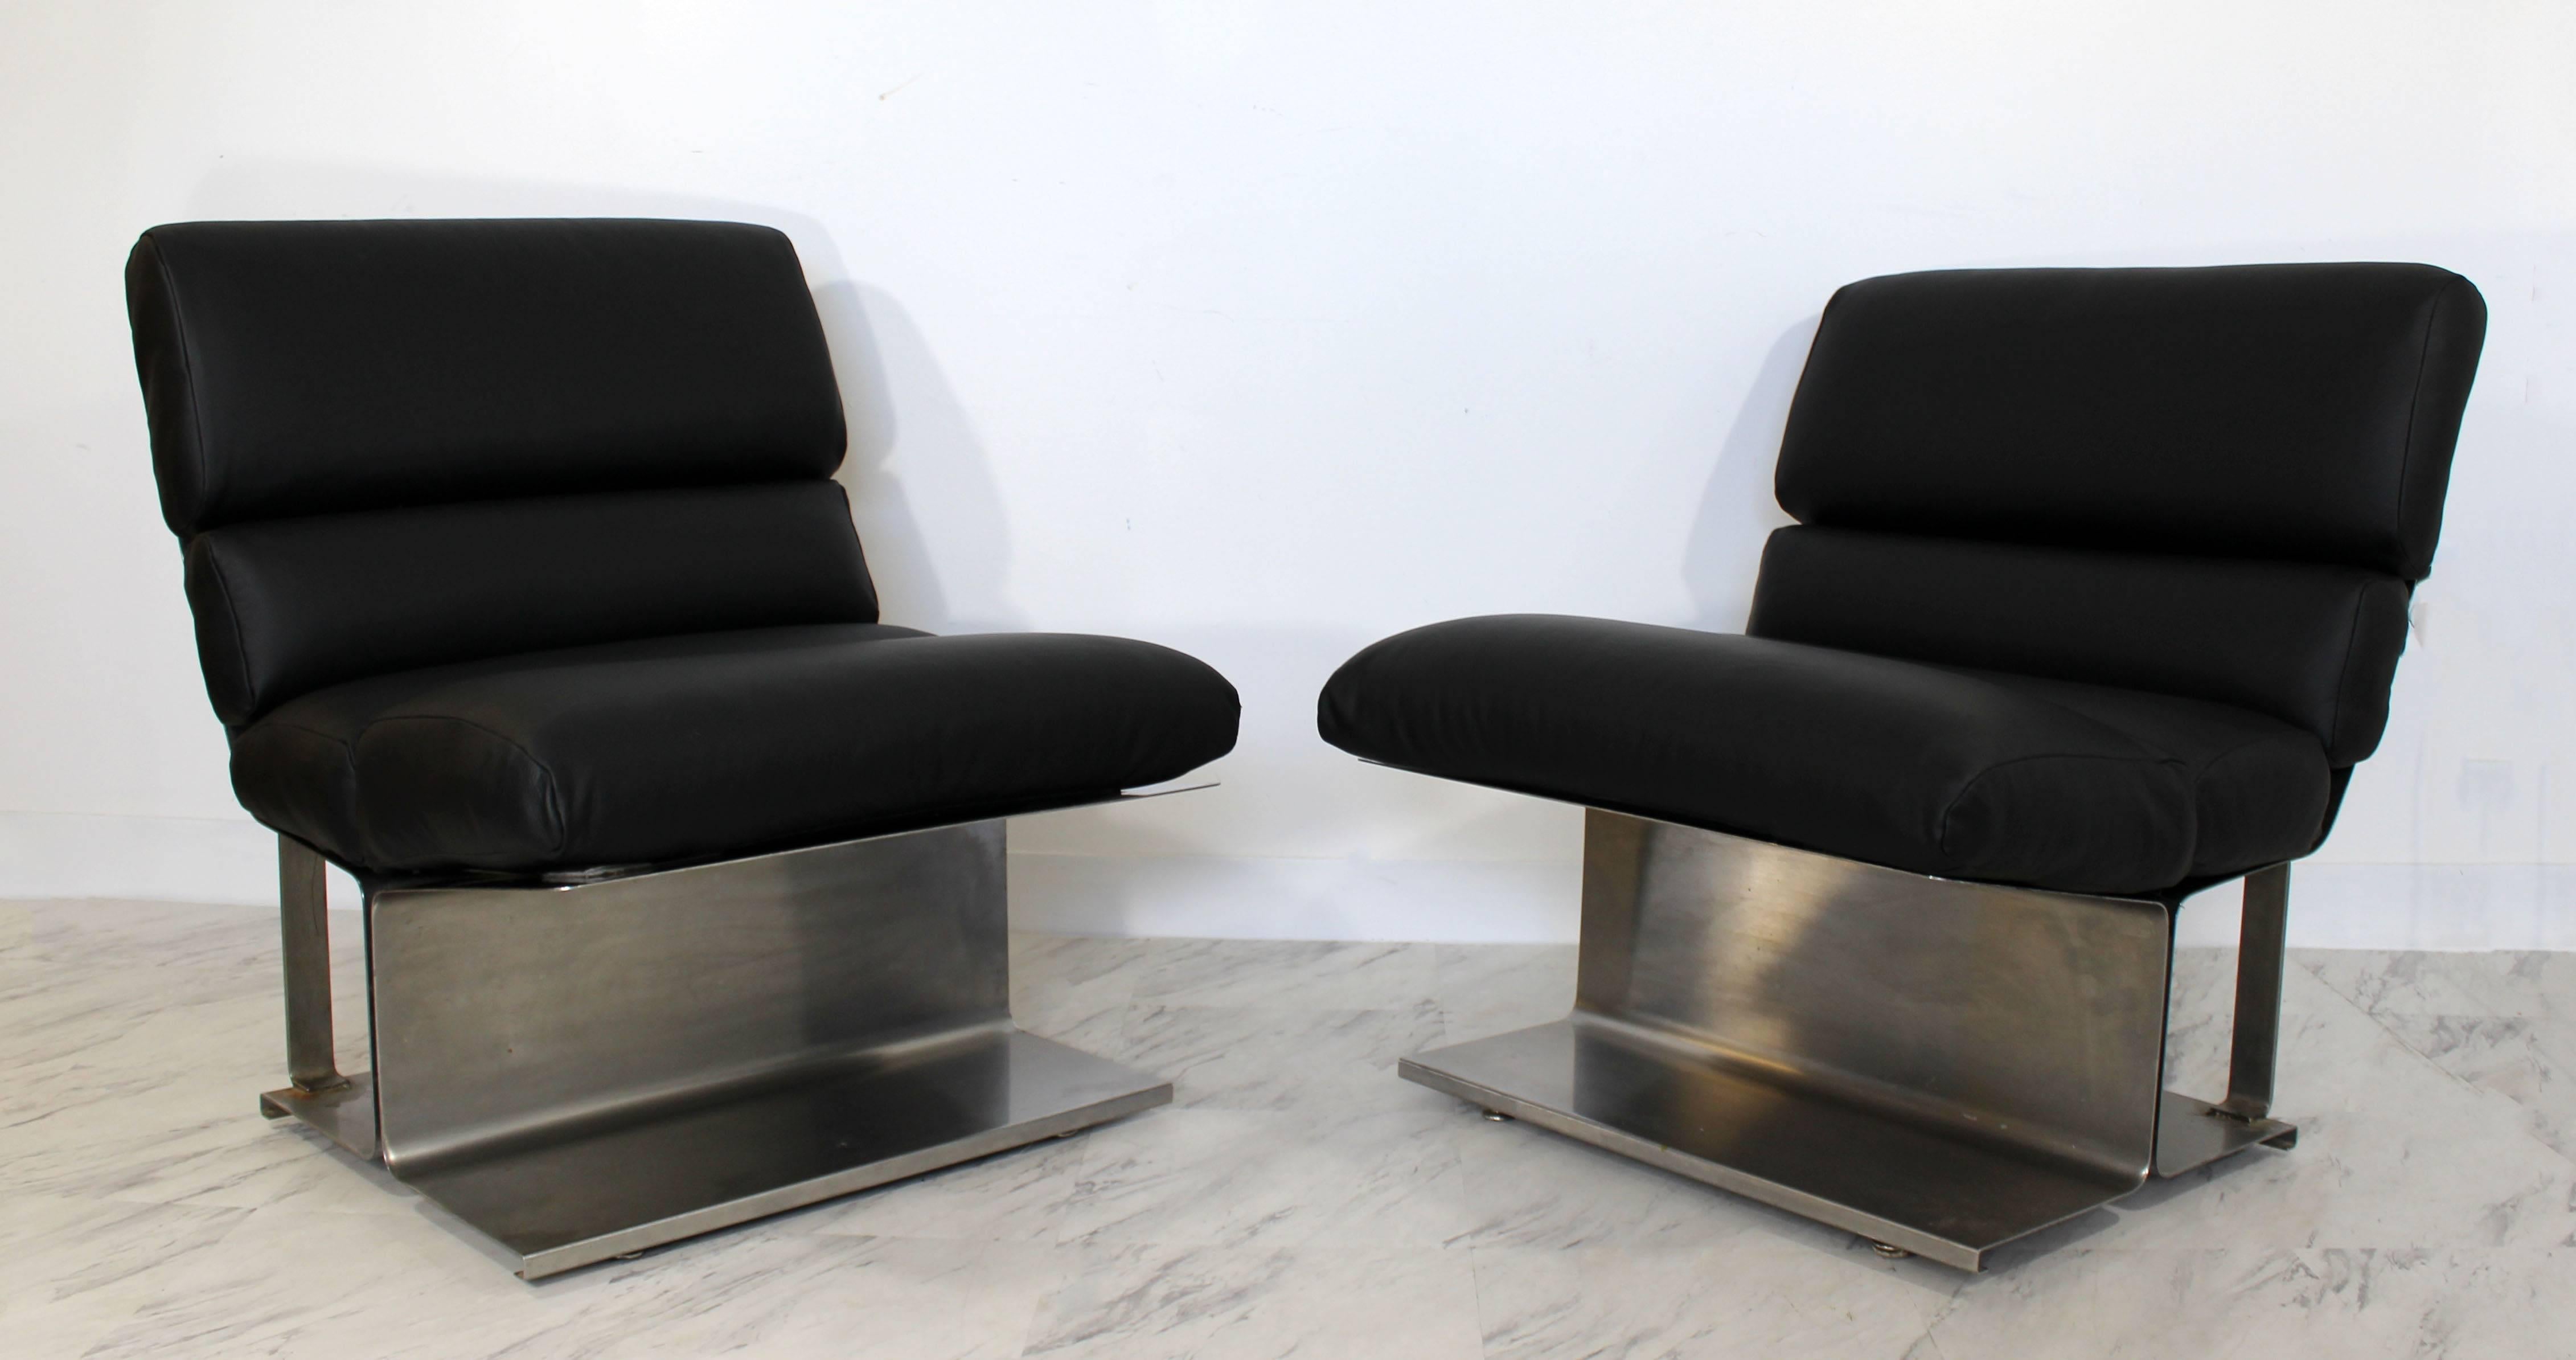 French Mid-Century Modern Pair of Steel Leather Lounge Chairs Paul Geoffroy Uginox